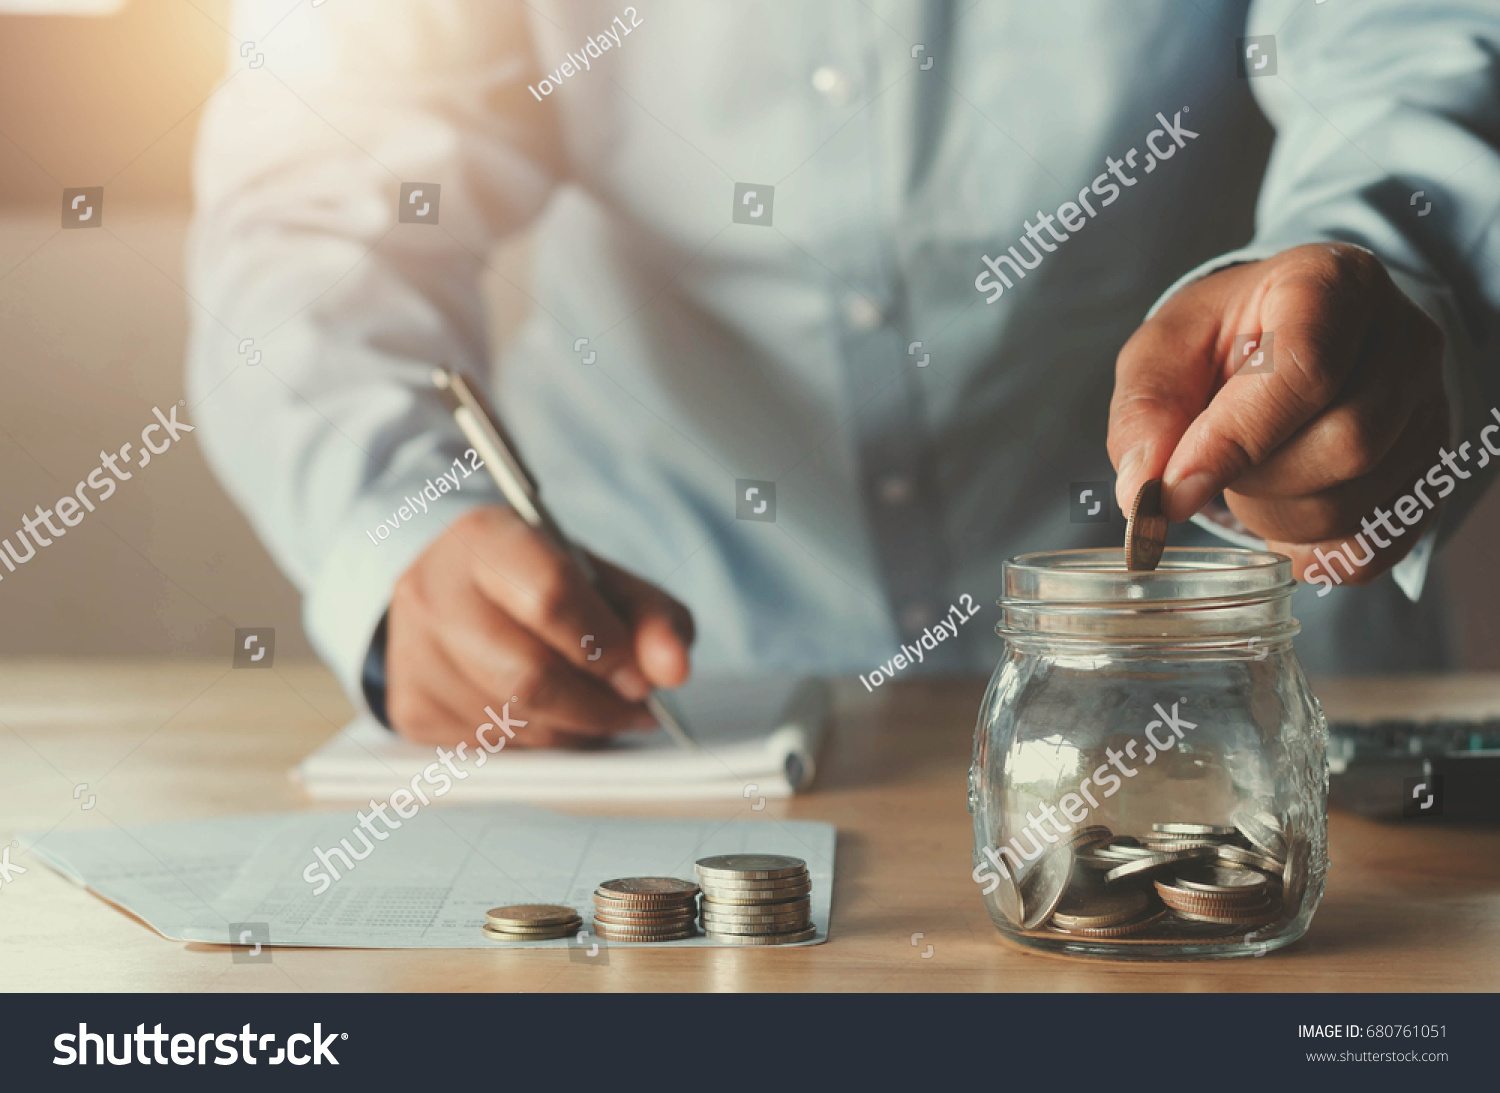 business accounting with saving money with hand putting coins in jug glass concept financial #680761051